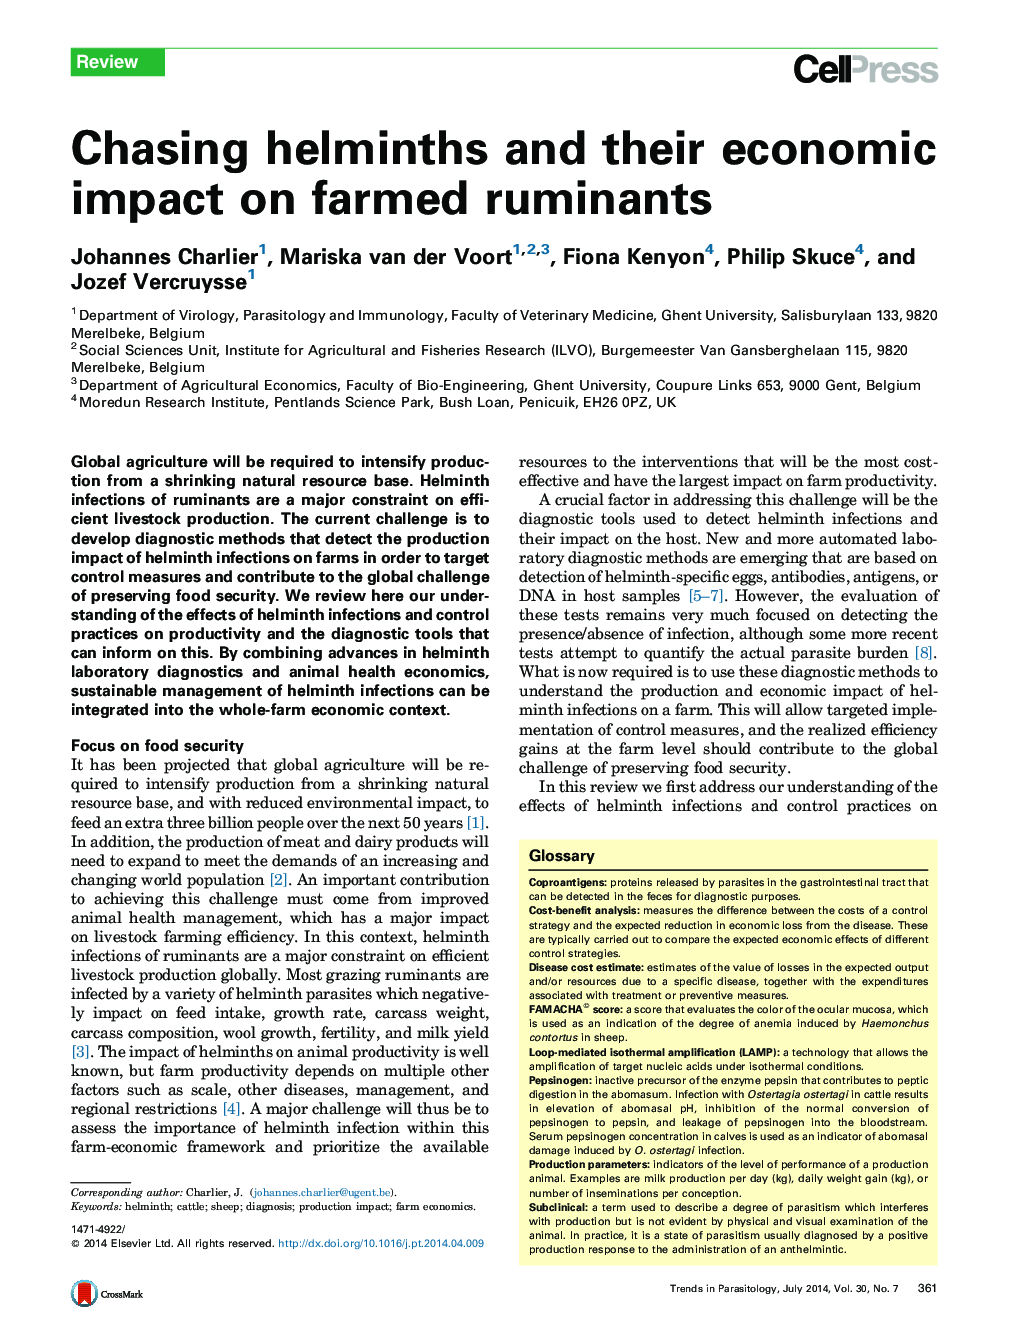 Chasing helminths and their economic impact on farmed ruminants